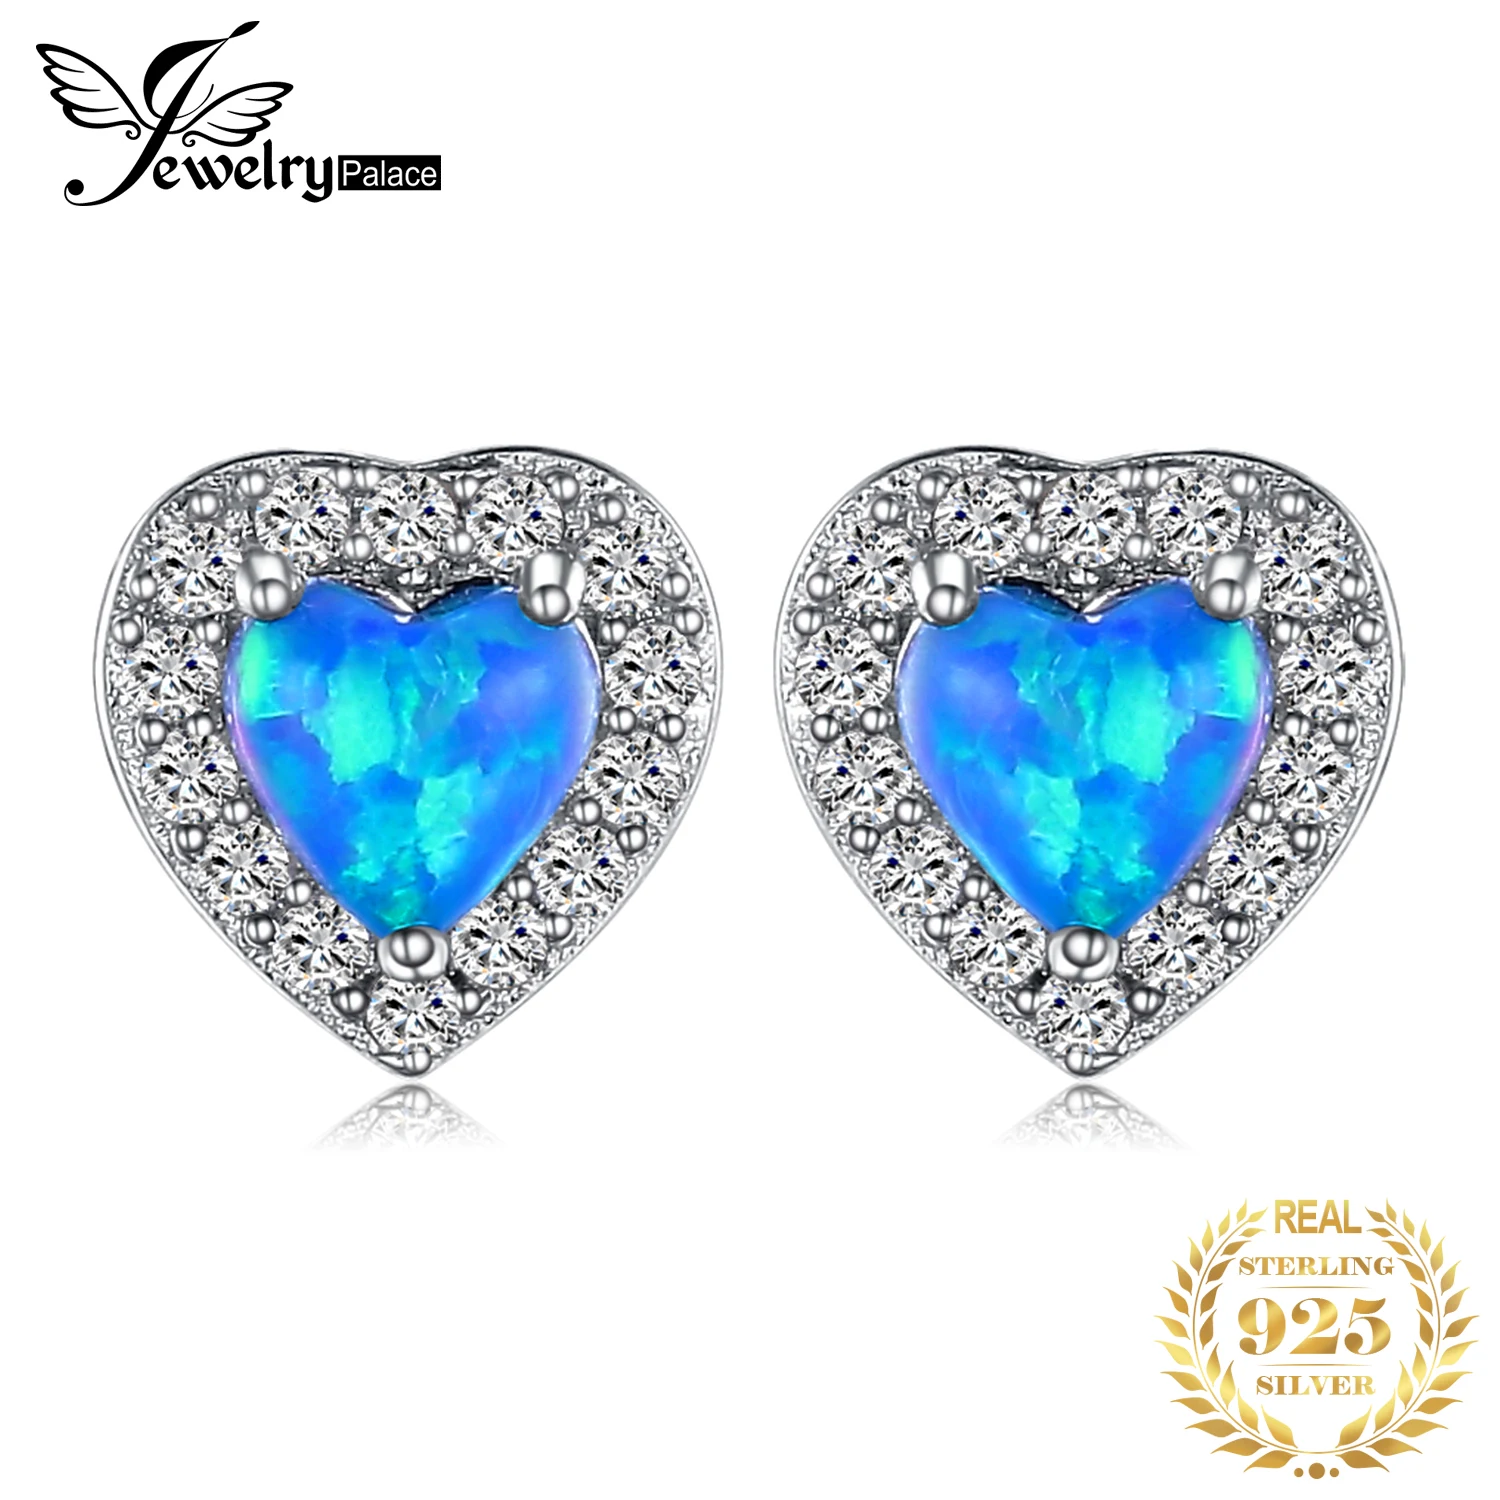 JewelryPalace Love Heart Created Blue Opal 925 Sterling Silver Stud Earrings for Woman Trendy Fine Jewelry Fashion Party Gift